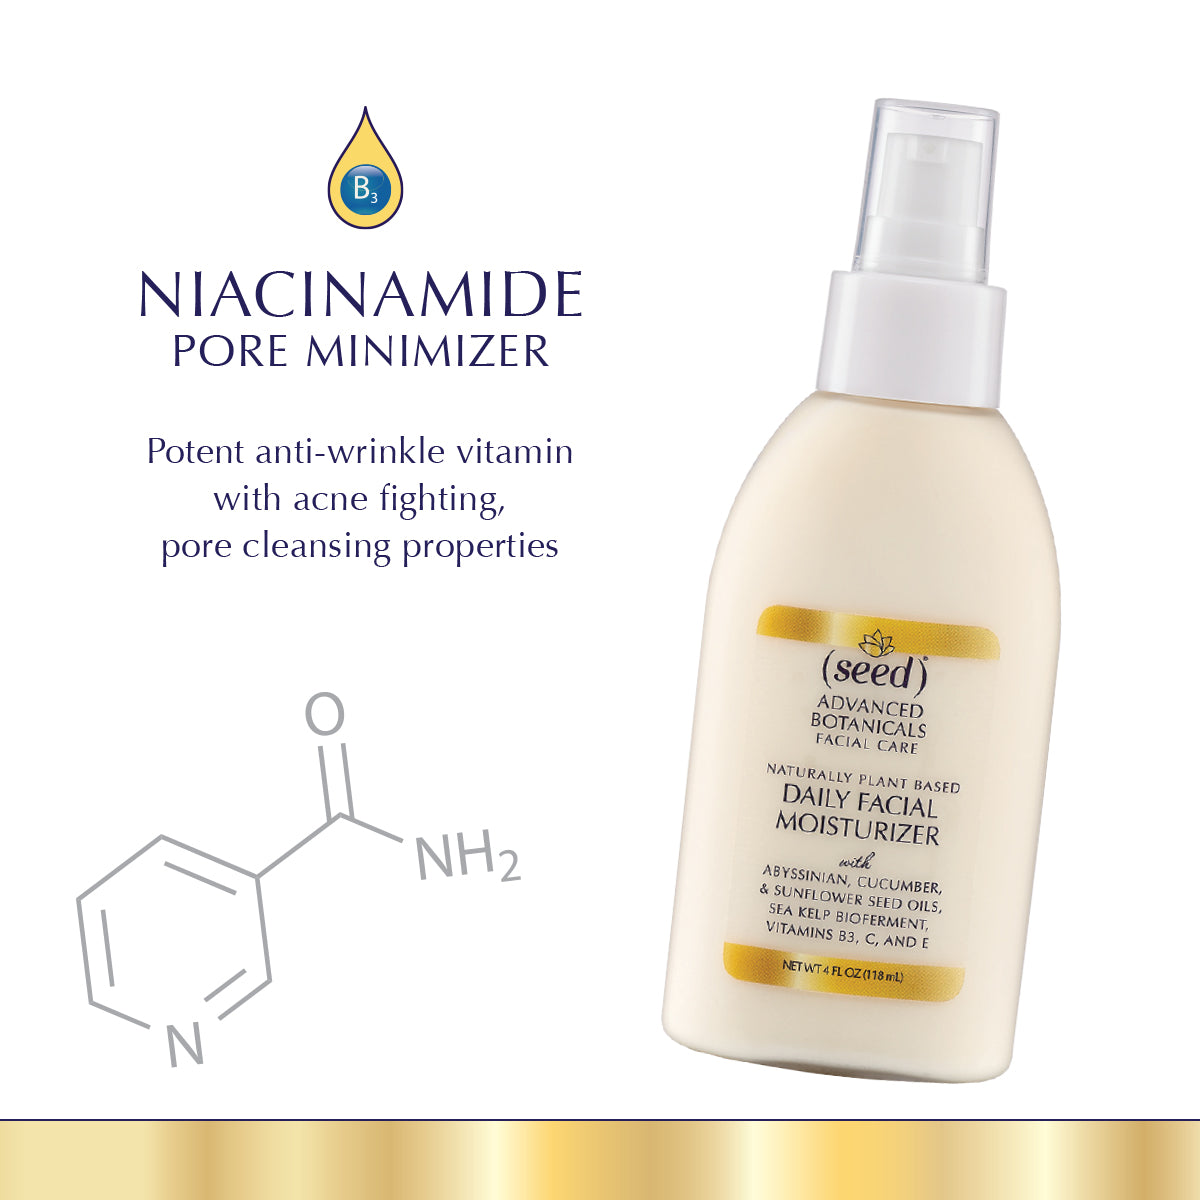 Seed Advanced Botanicals Daily Facial Moisturizer features Niacinamide